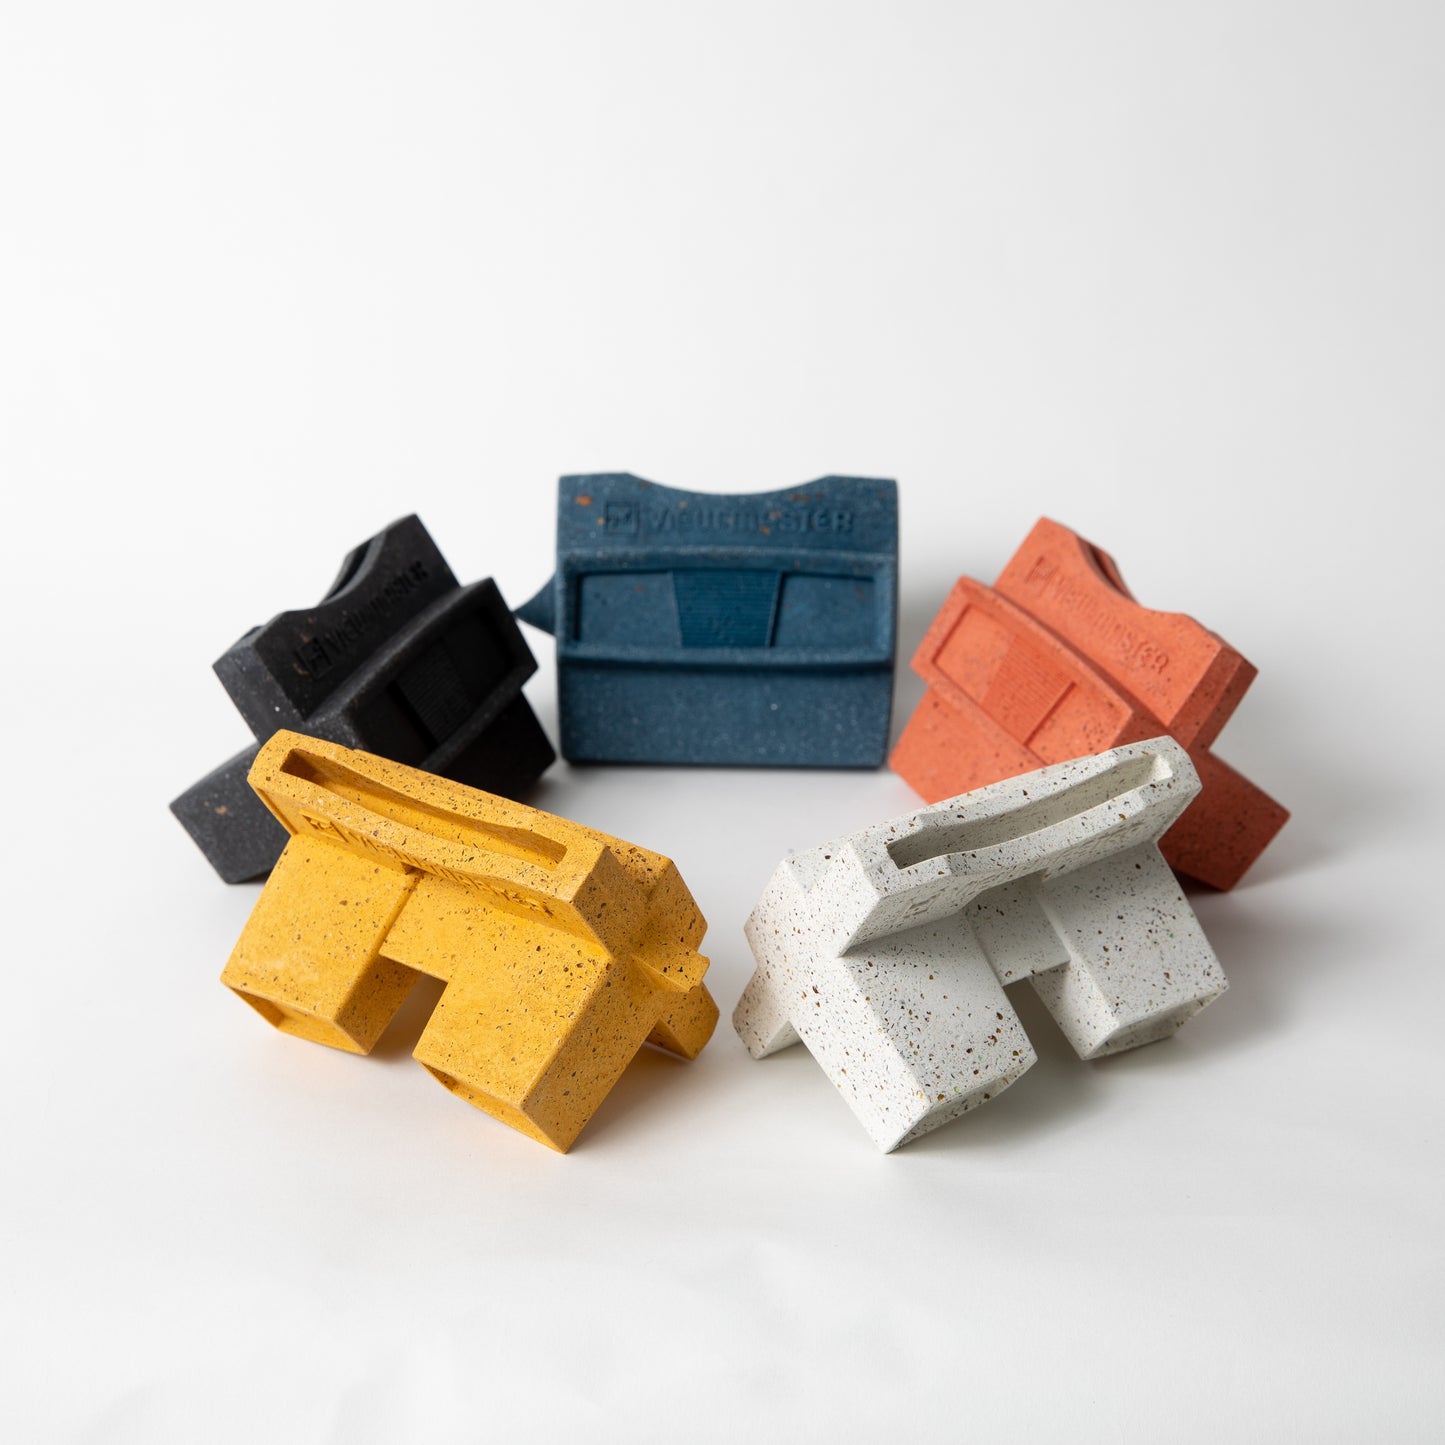 The retro business card holder in black, cobalt, coral, marigold, and white terrazzo.